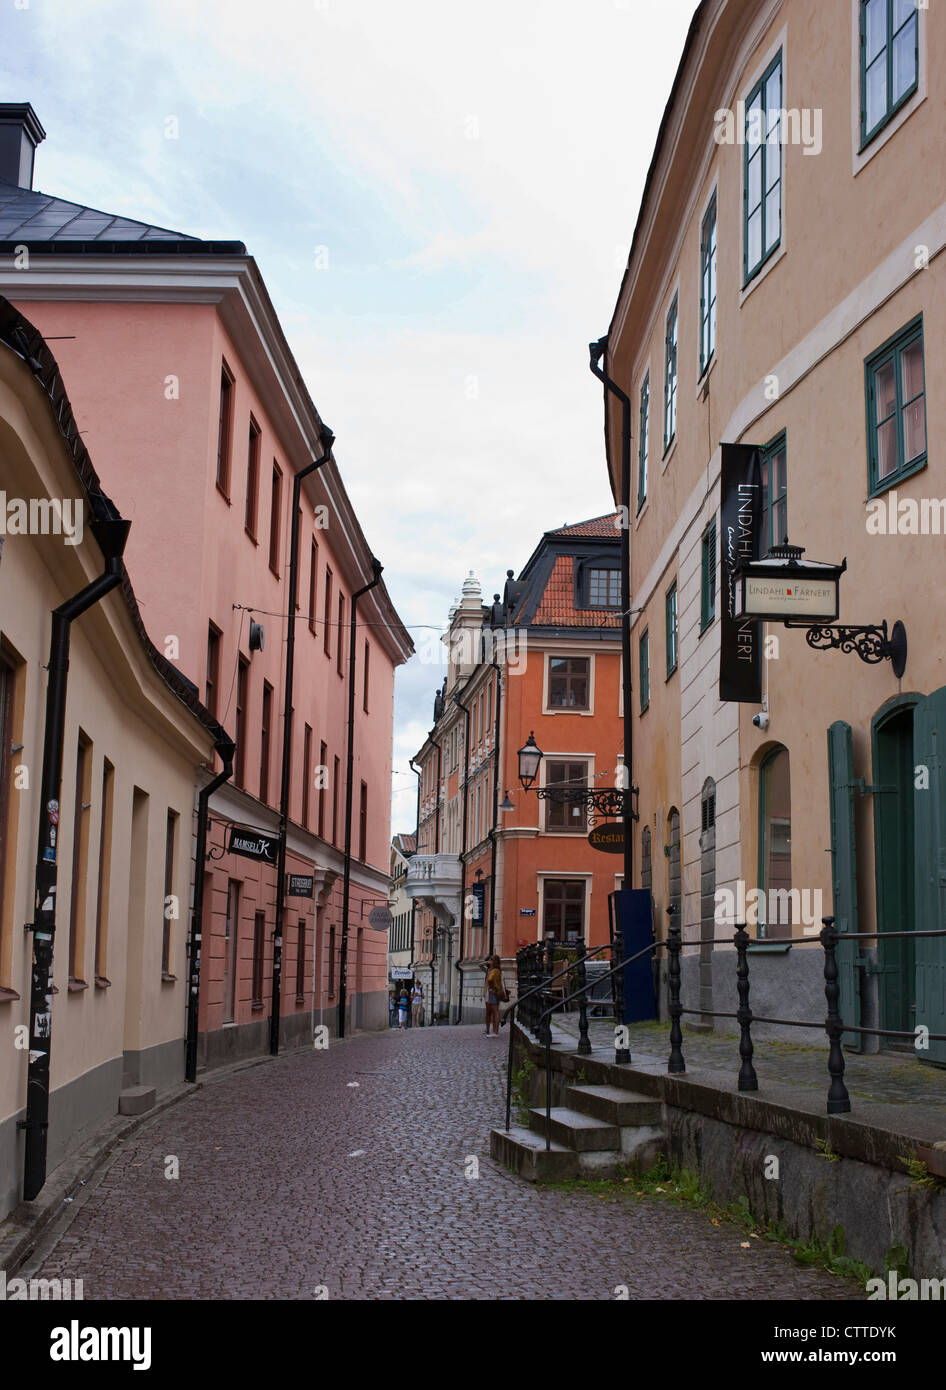 The old town streets of Uppsala, Sweden. Stock Photo